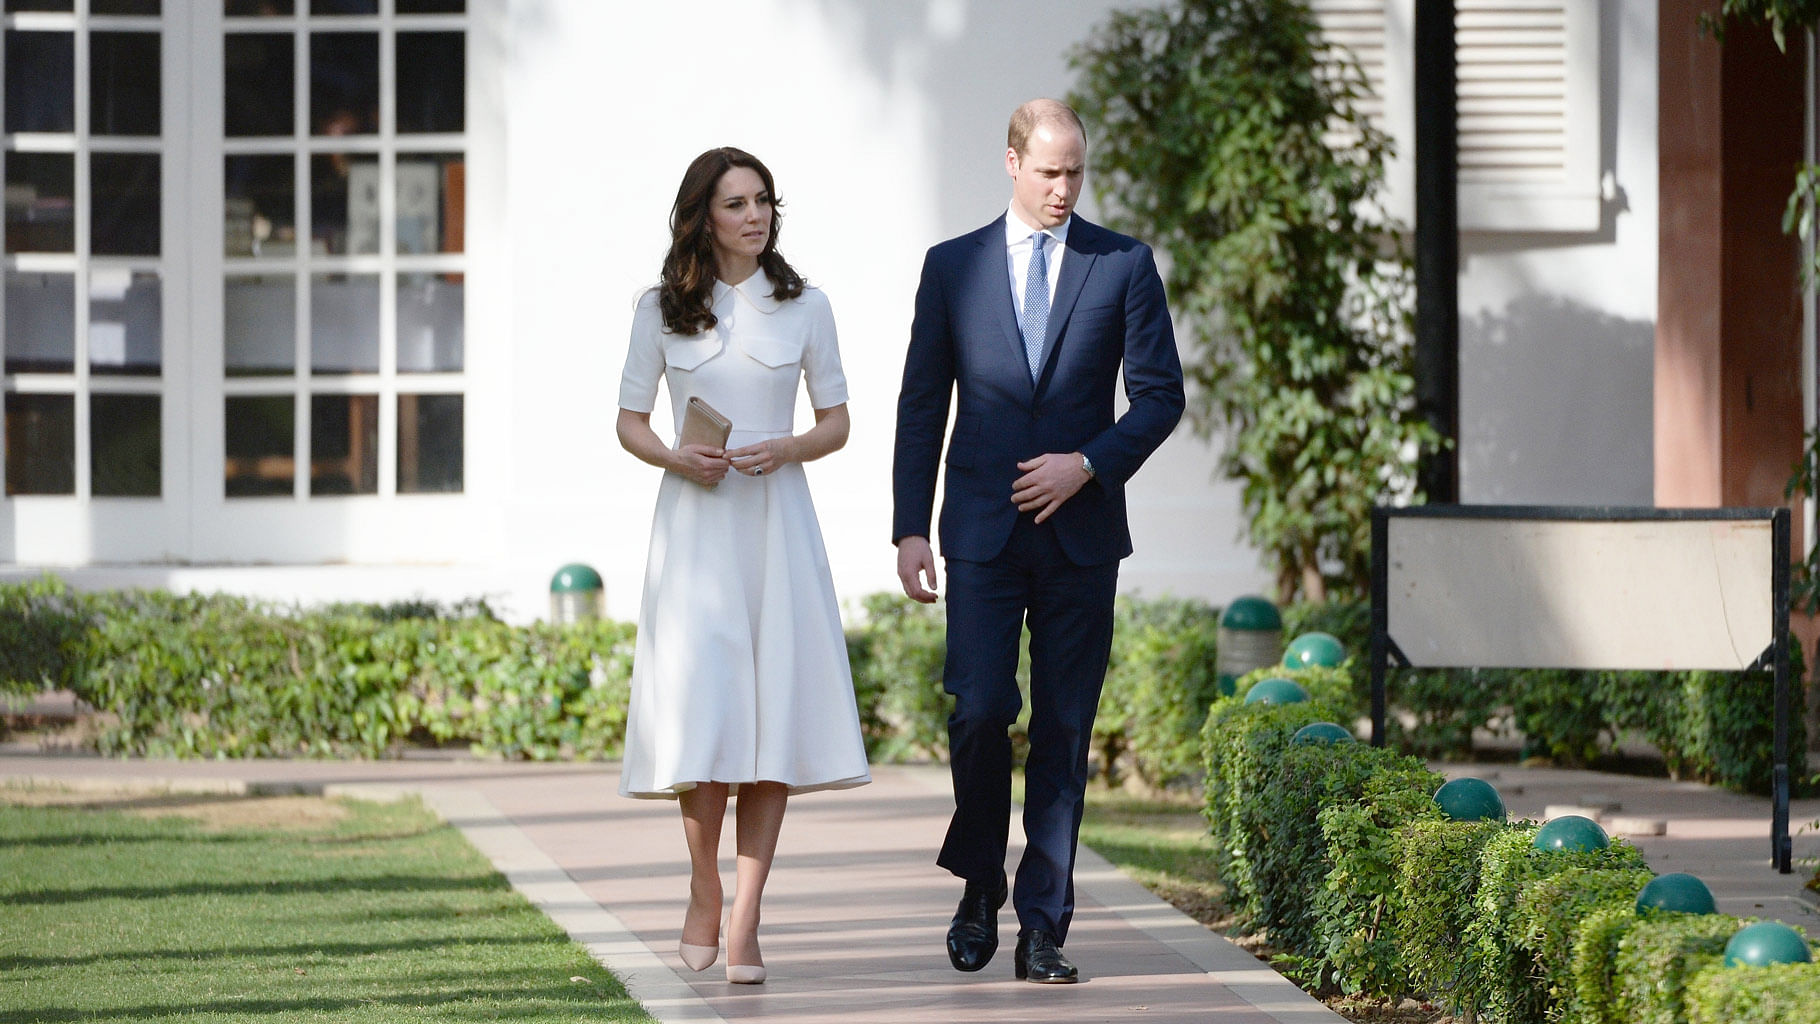 The Dutch and Duchess of Cambridge, William and Kate. (Photo: AP)